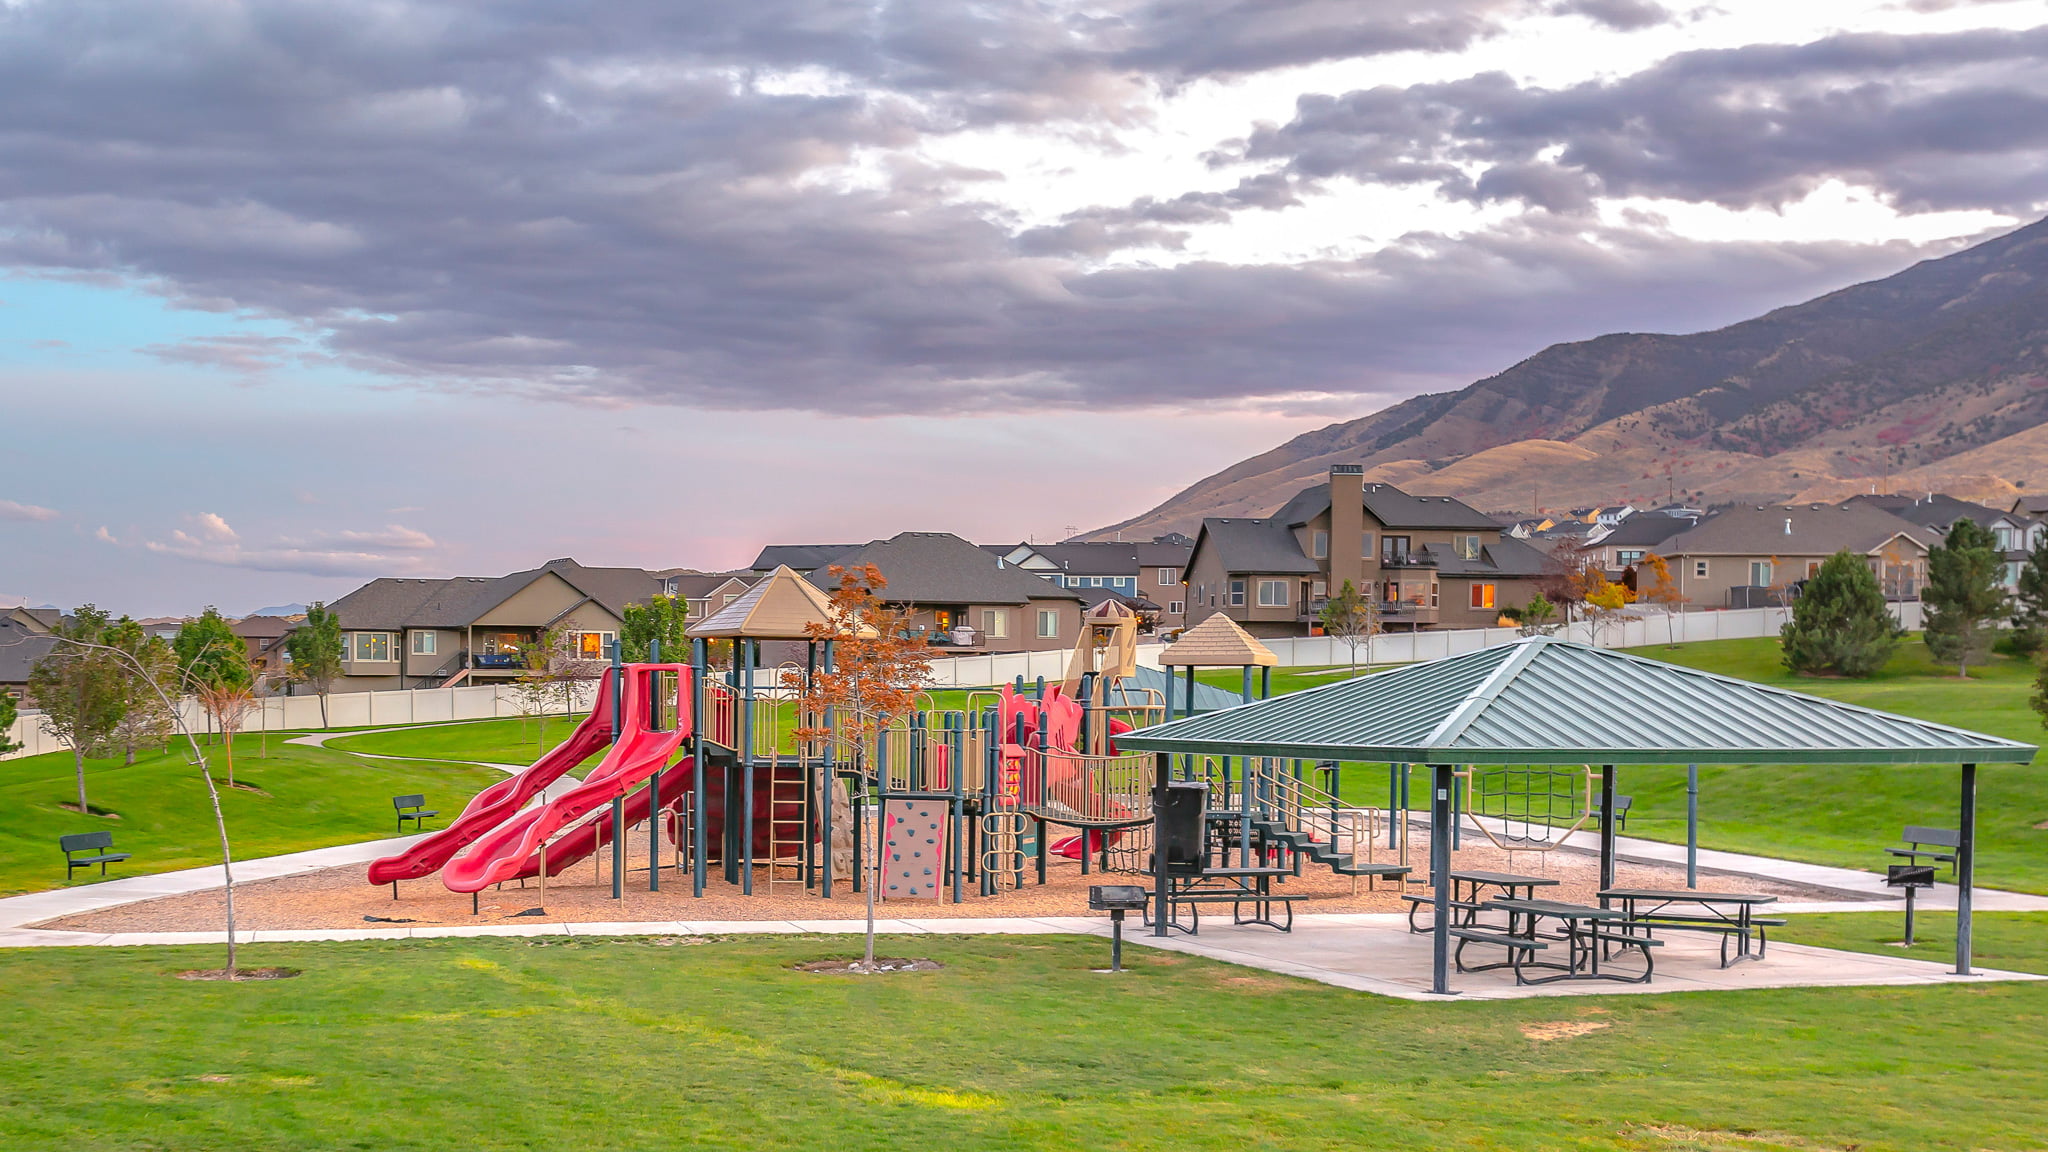 Playground set amidst a neighborhood of single-family homes with a mountain backdrop.